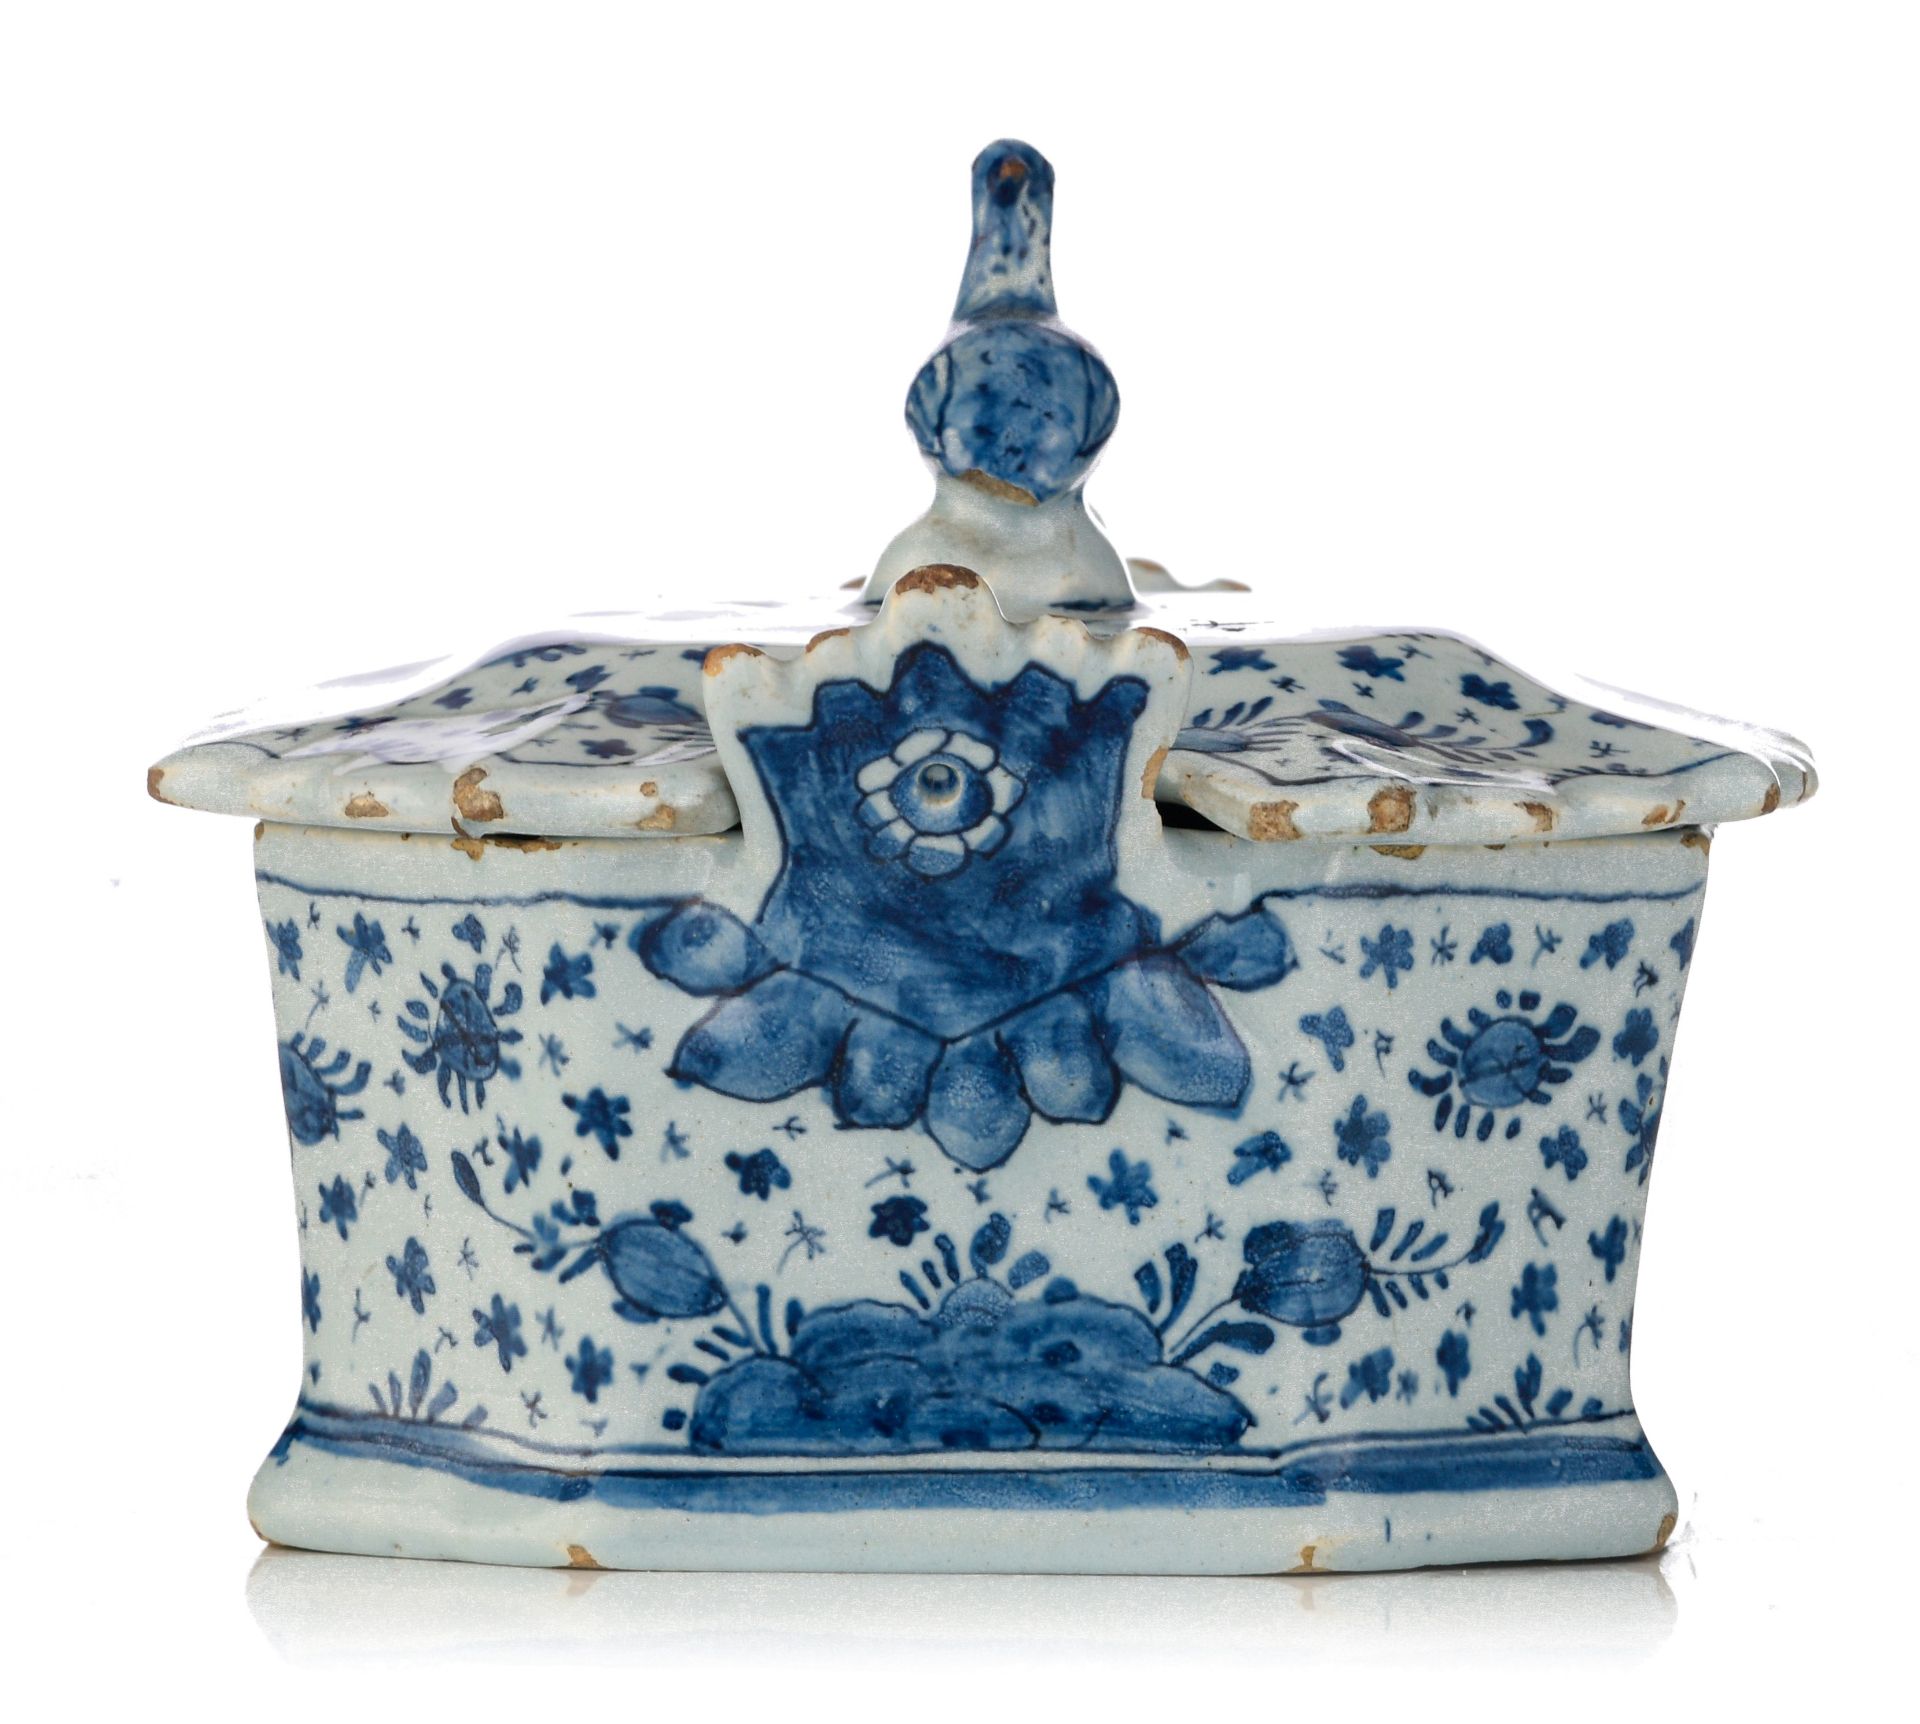 (BIDDING ONLY ON CARLOBONTE.BE) A fine Delft blue and white butter tub, marked 'De Lampetkan', 18thC - Image 5 of 14